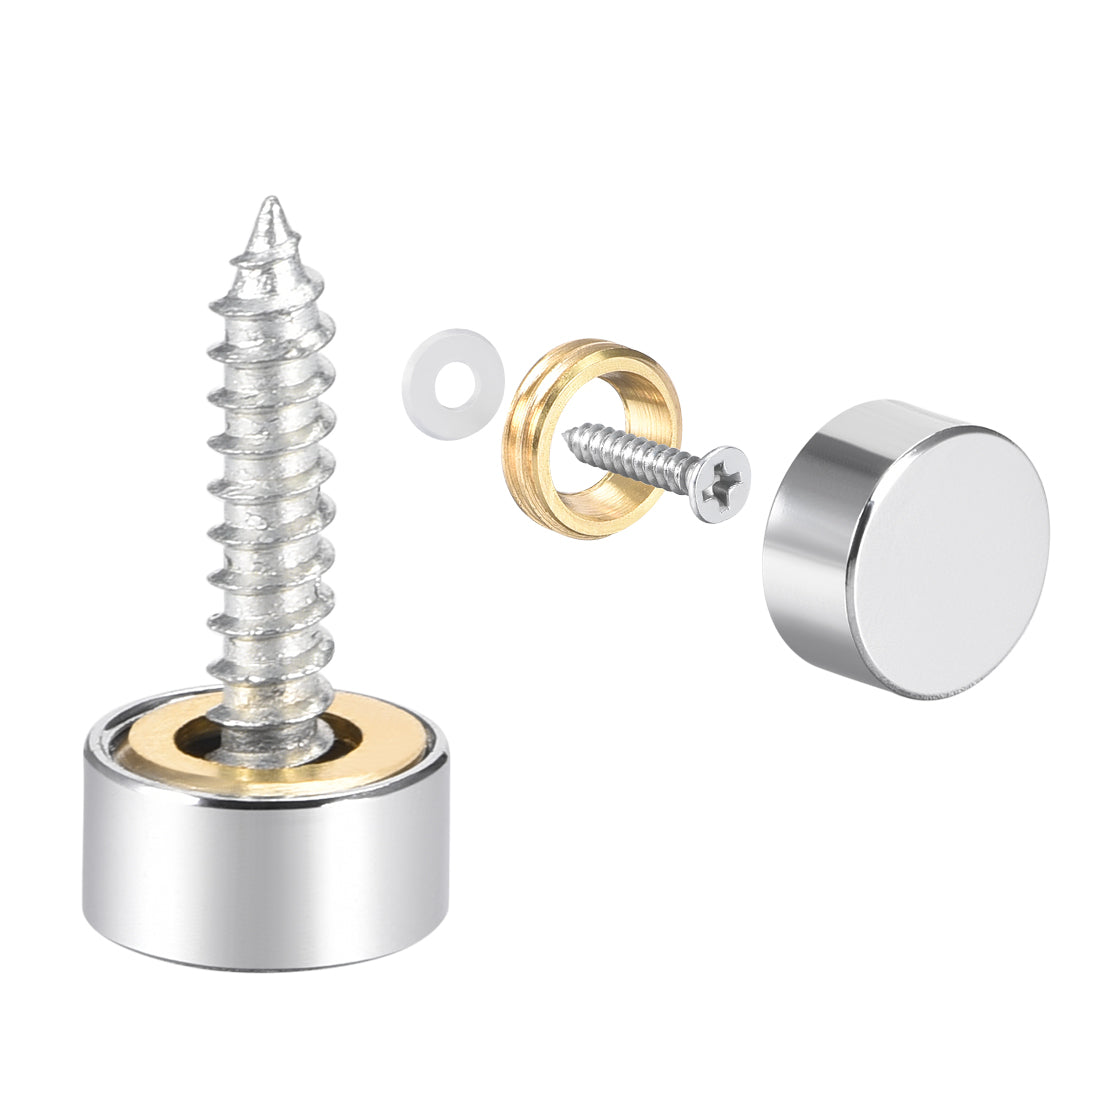 uxcell Uxcell Mirror Screws Decorative Caps Cover Stainless Steel 2pcs